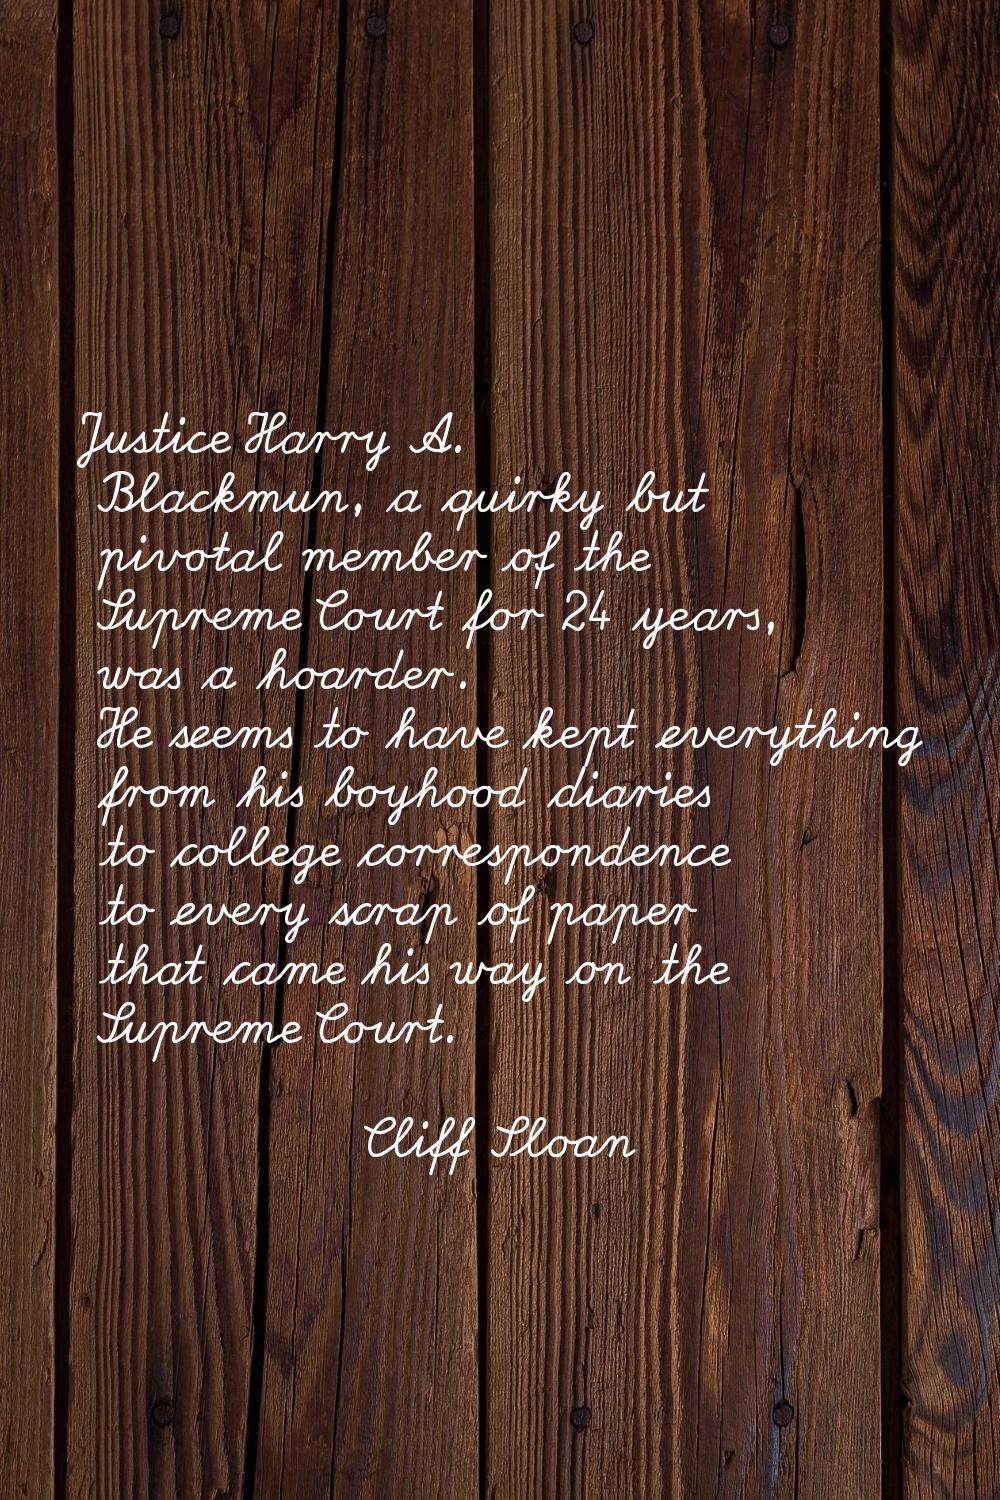 Justice Harry A. Blackmun, a quirky but pivotal member of the Supreme Court for 24 years, was a hoa